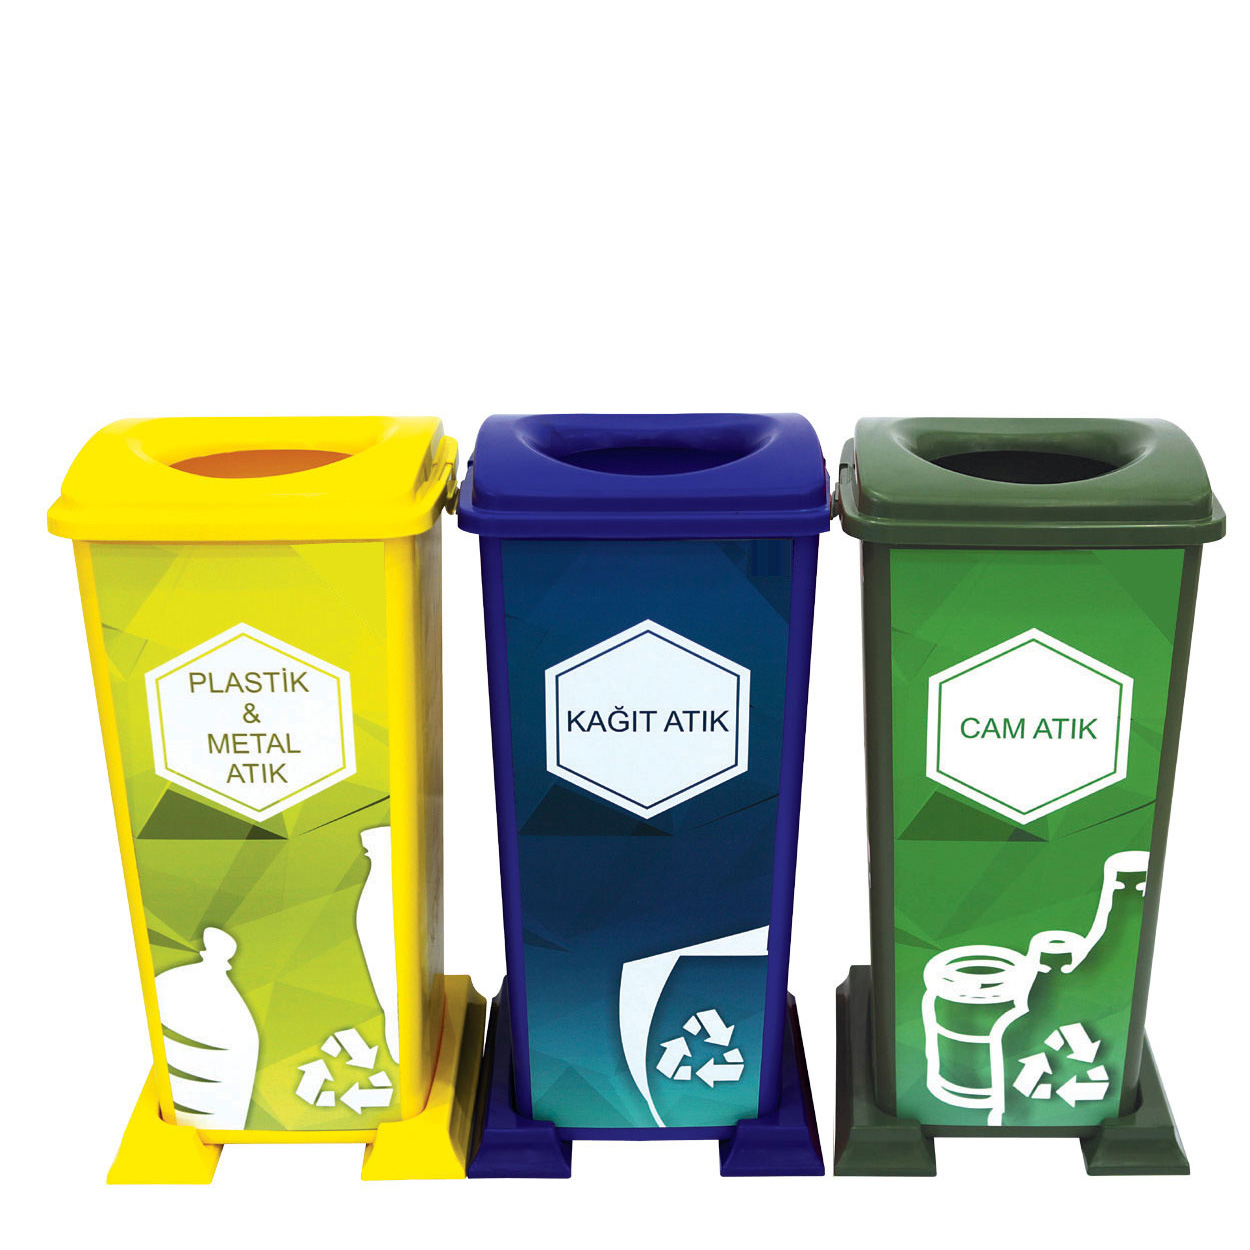 Recycle bin 3 compartments